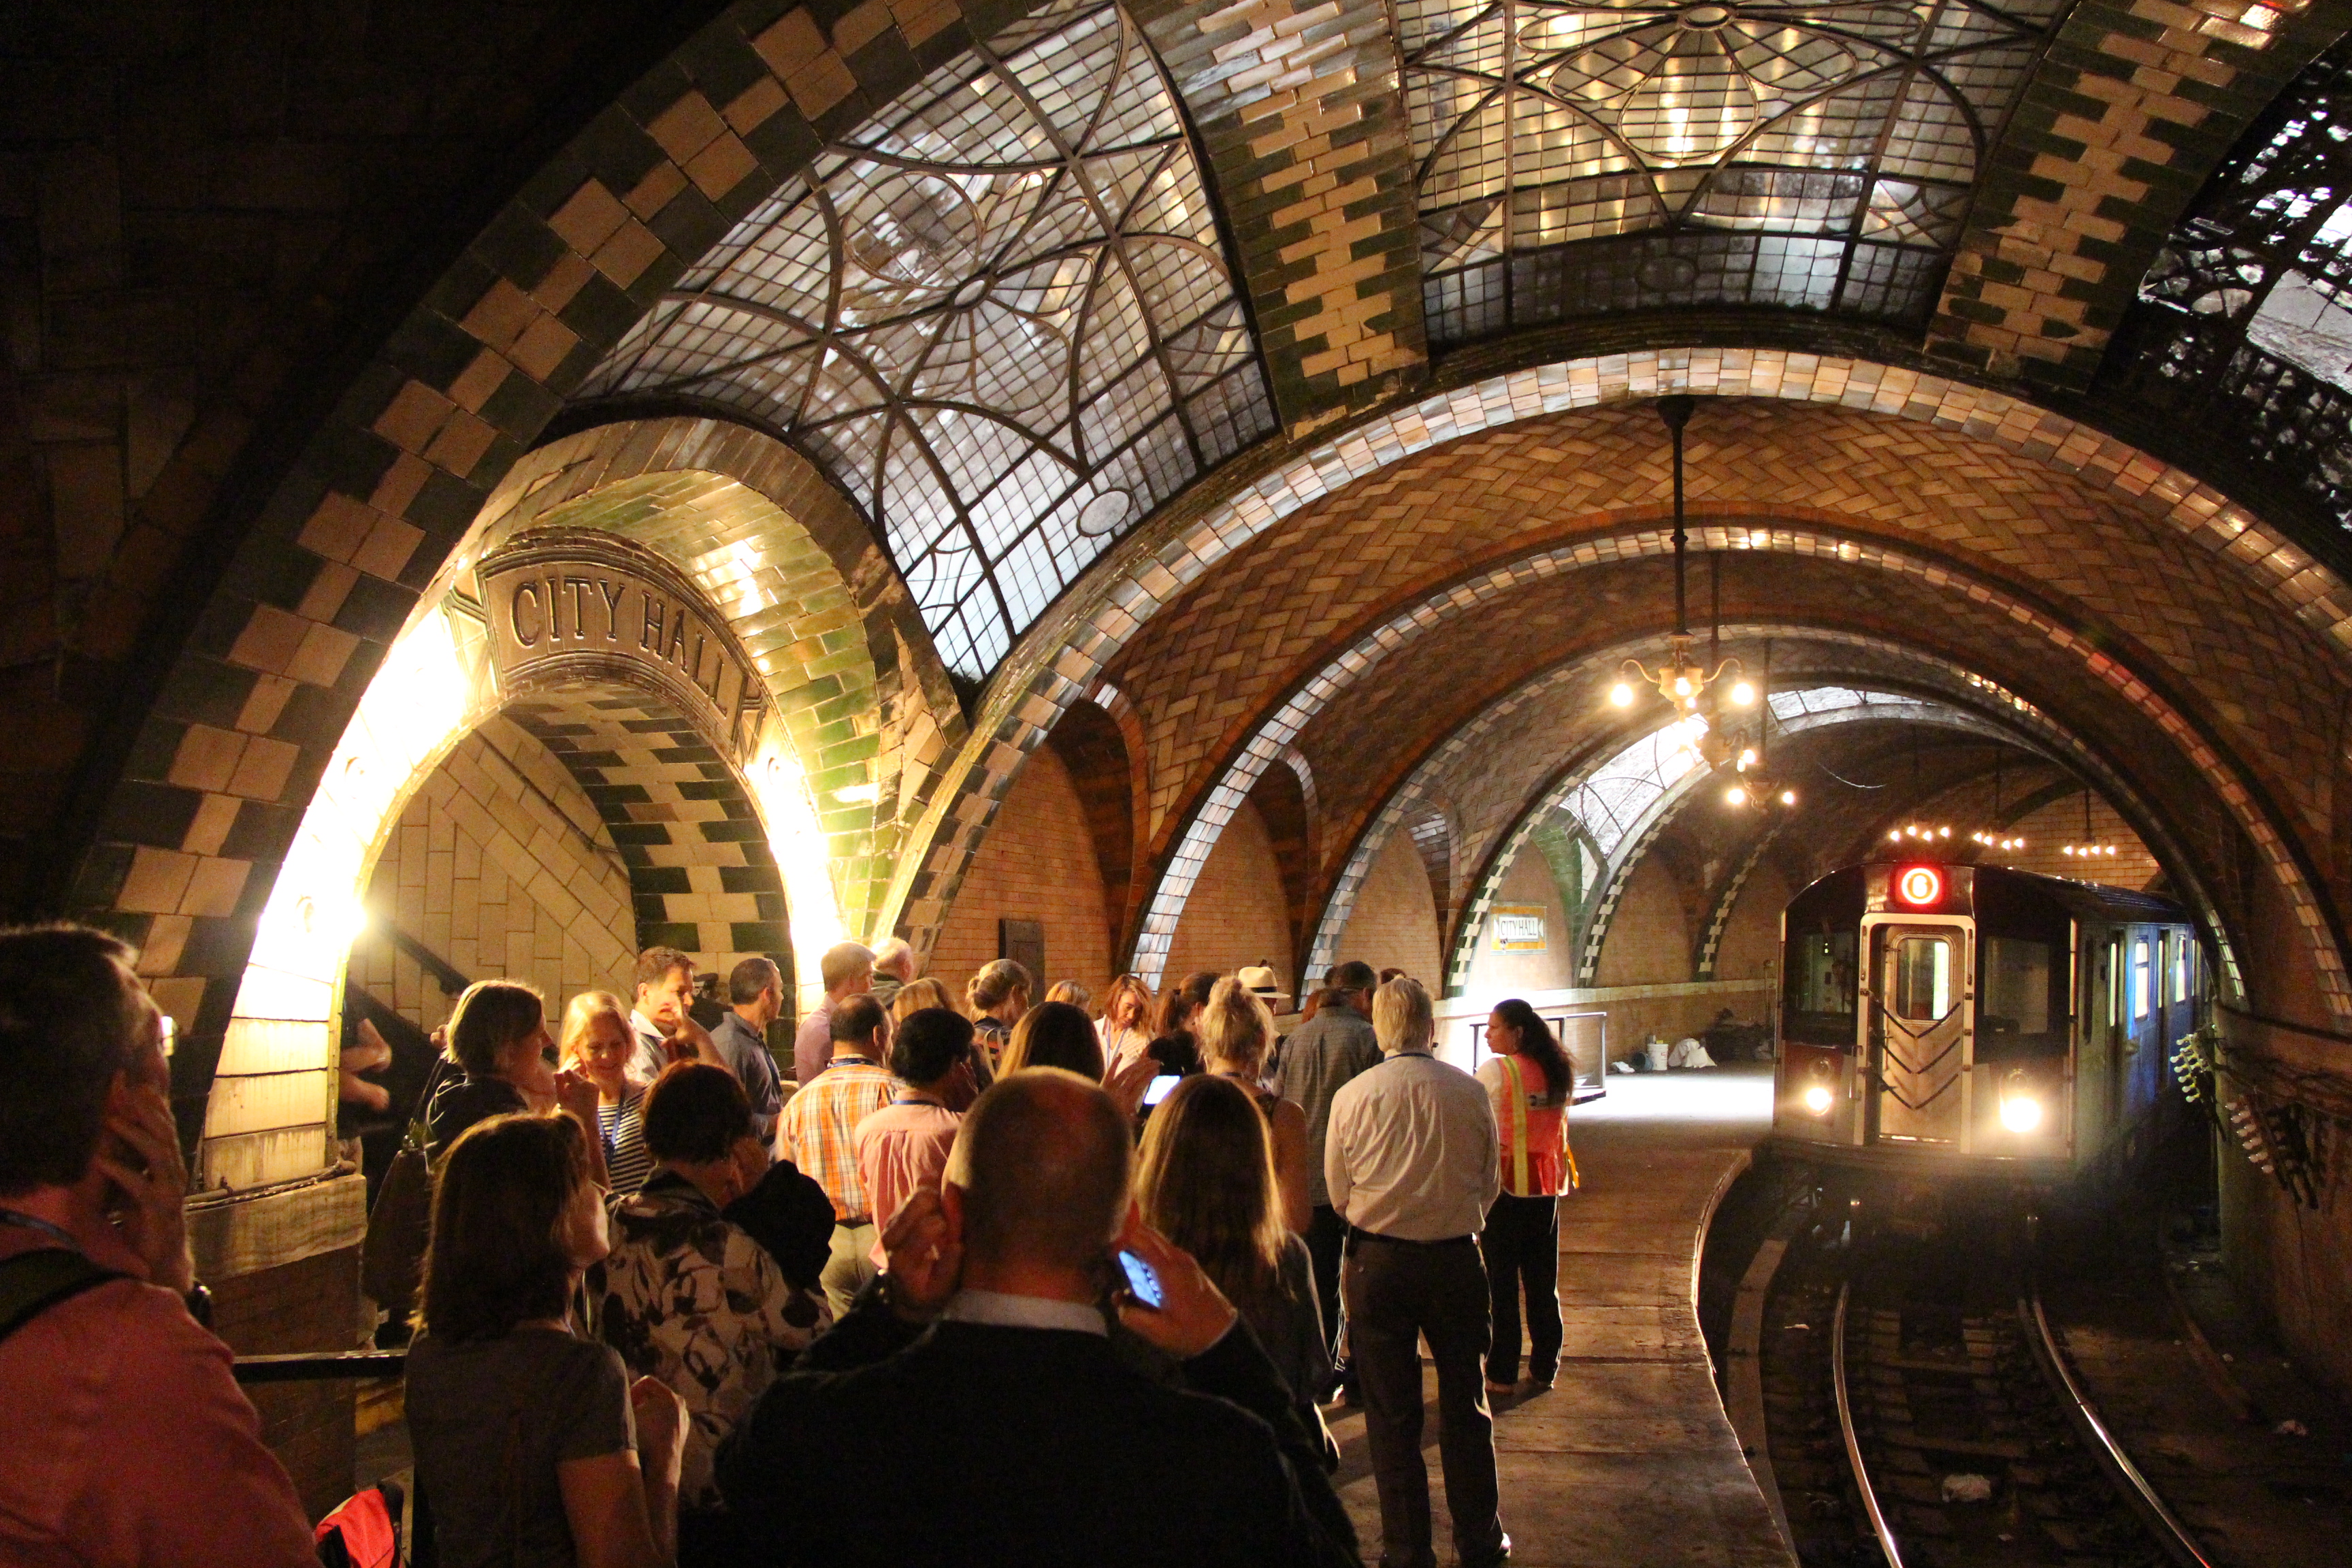 Transit Museum Members explore the old City Hall station